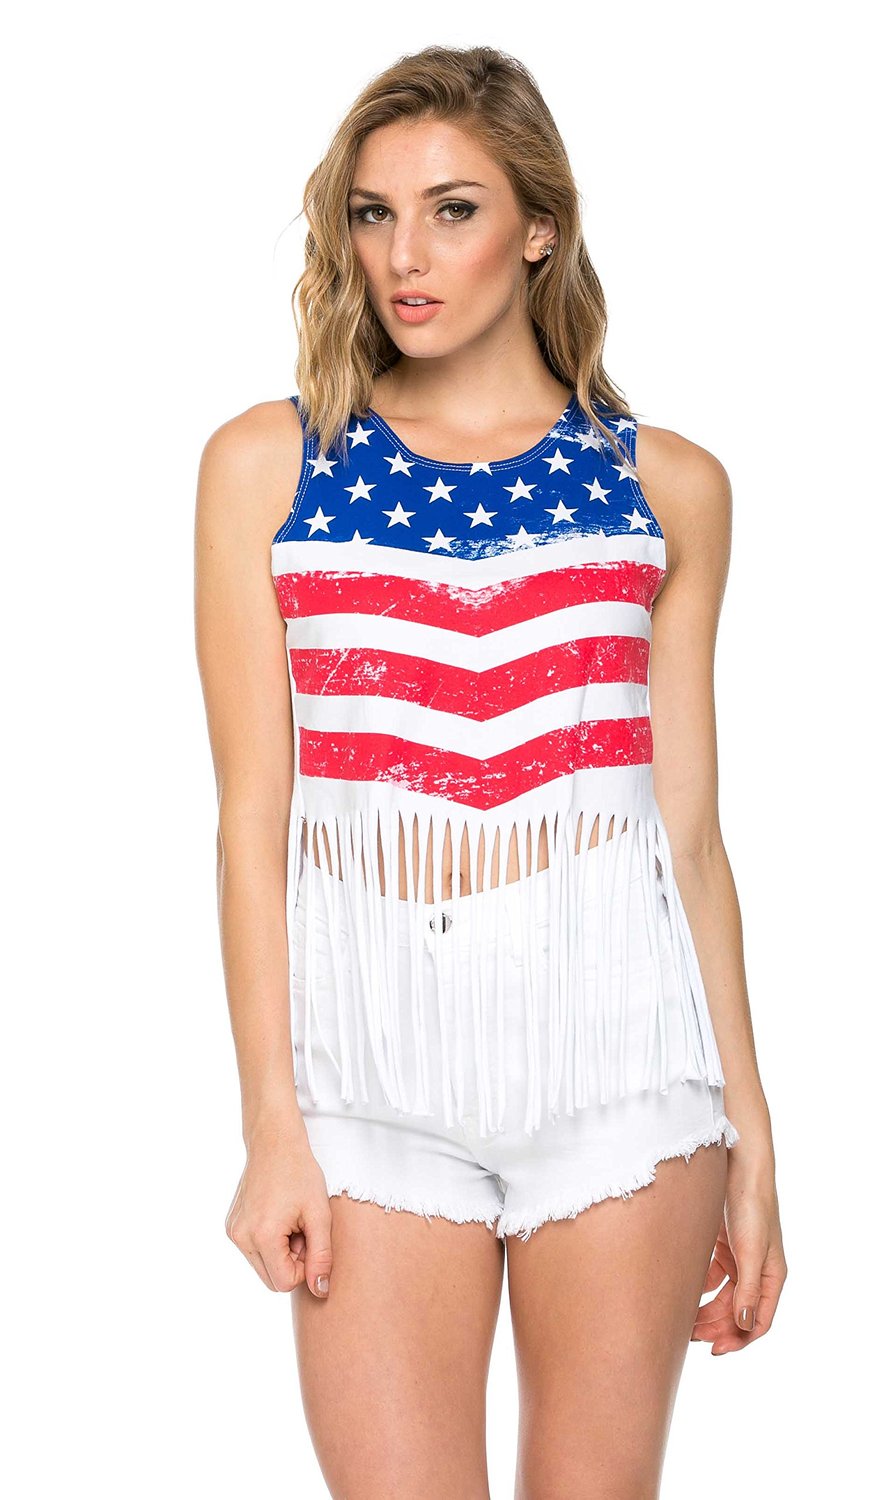 Fringed American Flag Top Made in the USA (Plus Sizes Available)